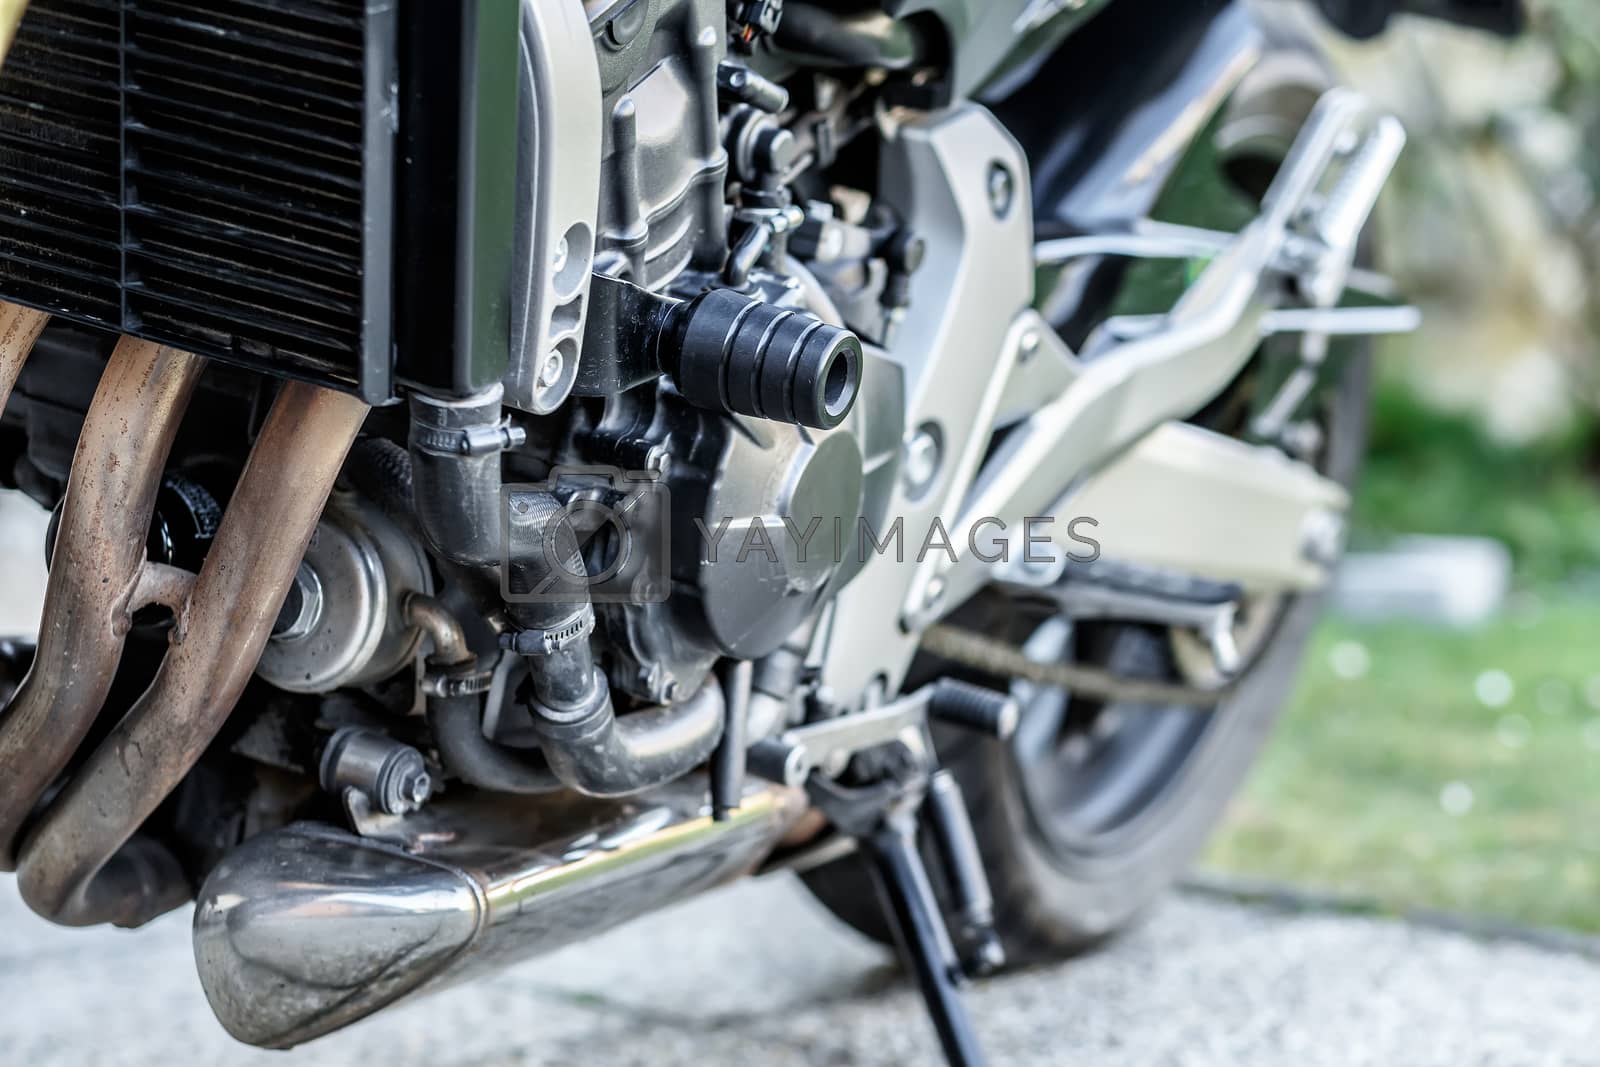 Royalty free image of Motorcycle engine close-up detail background by artush